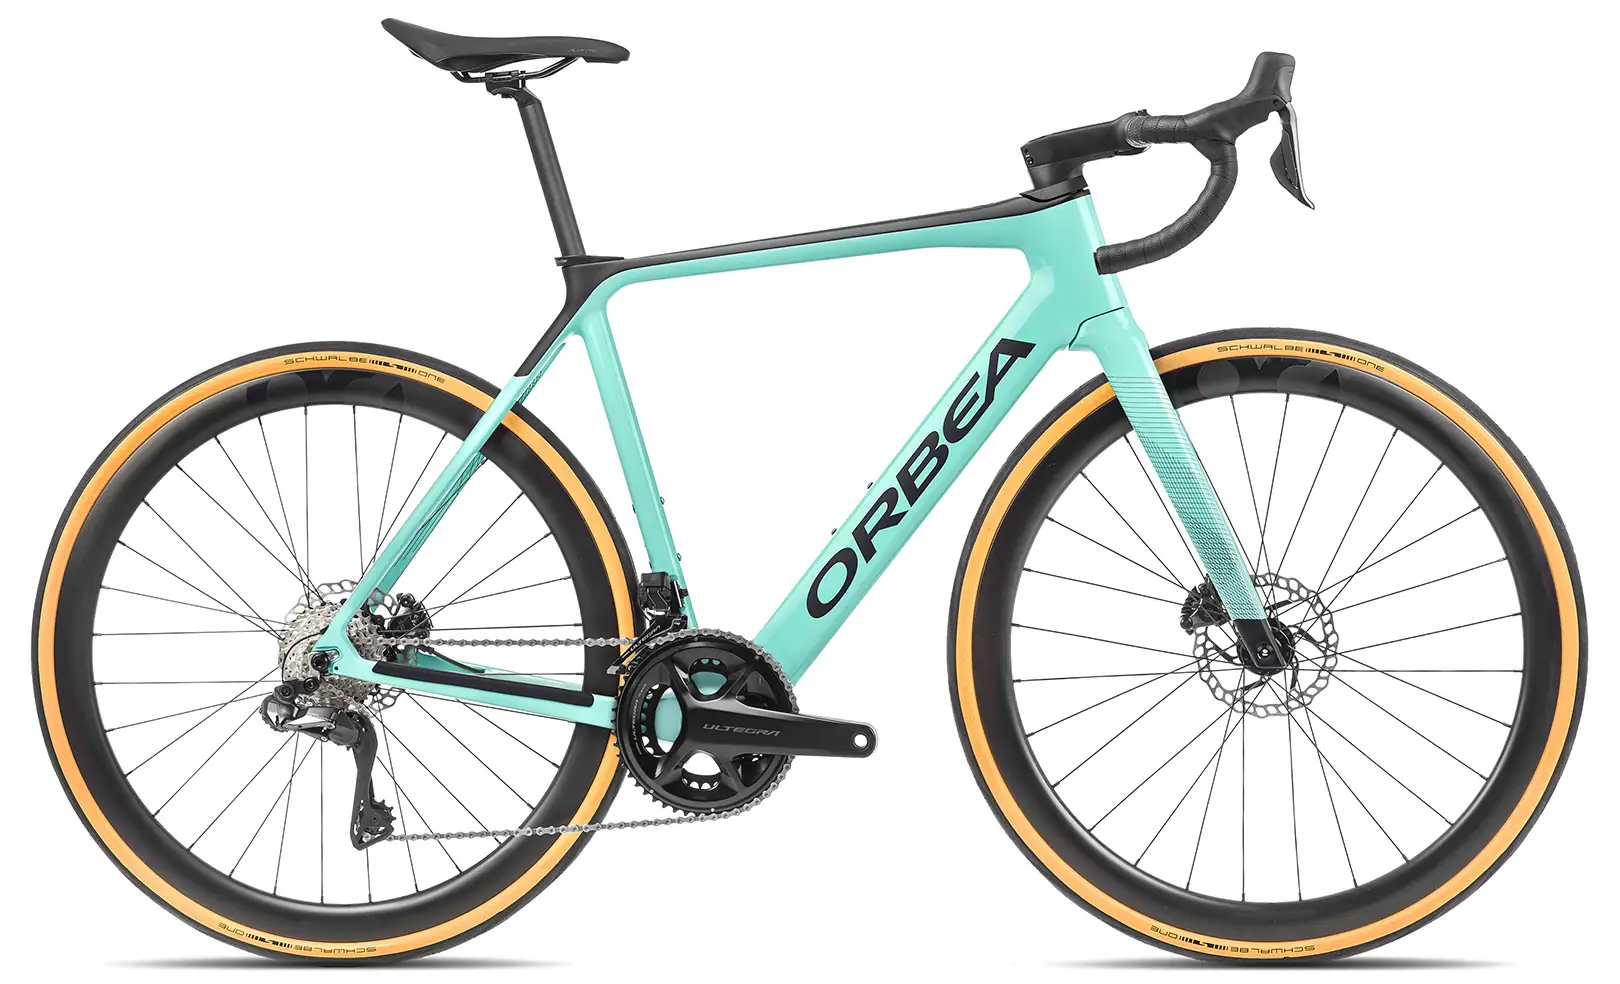 Orbea Gain M20i Electric Road Bike Lightweight Carbon Frame Turquoise XL 58cm